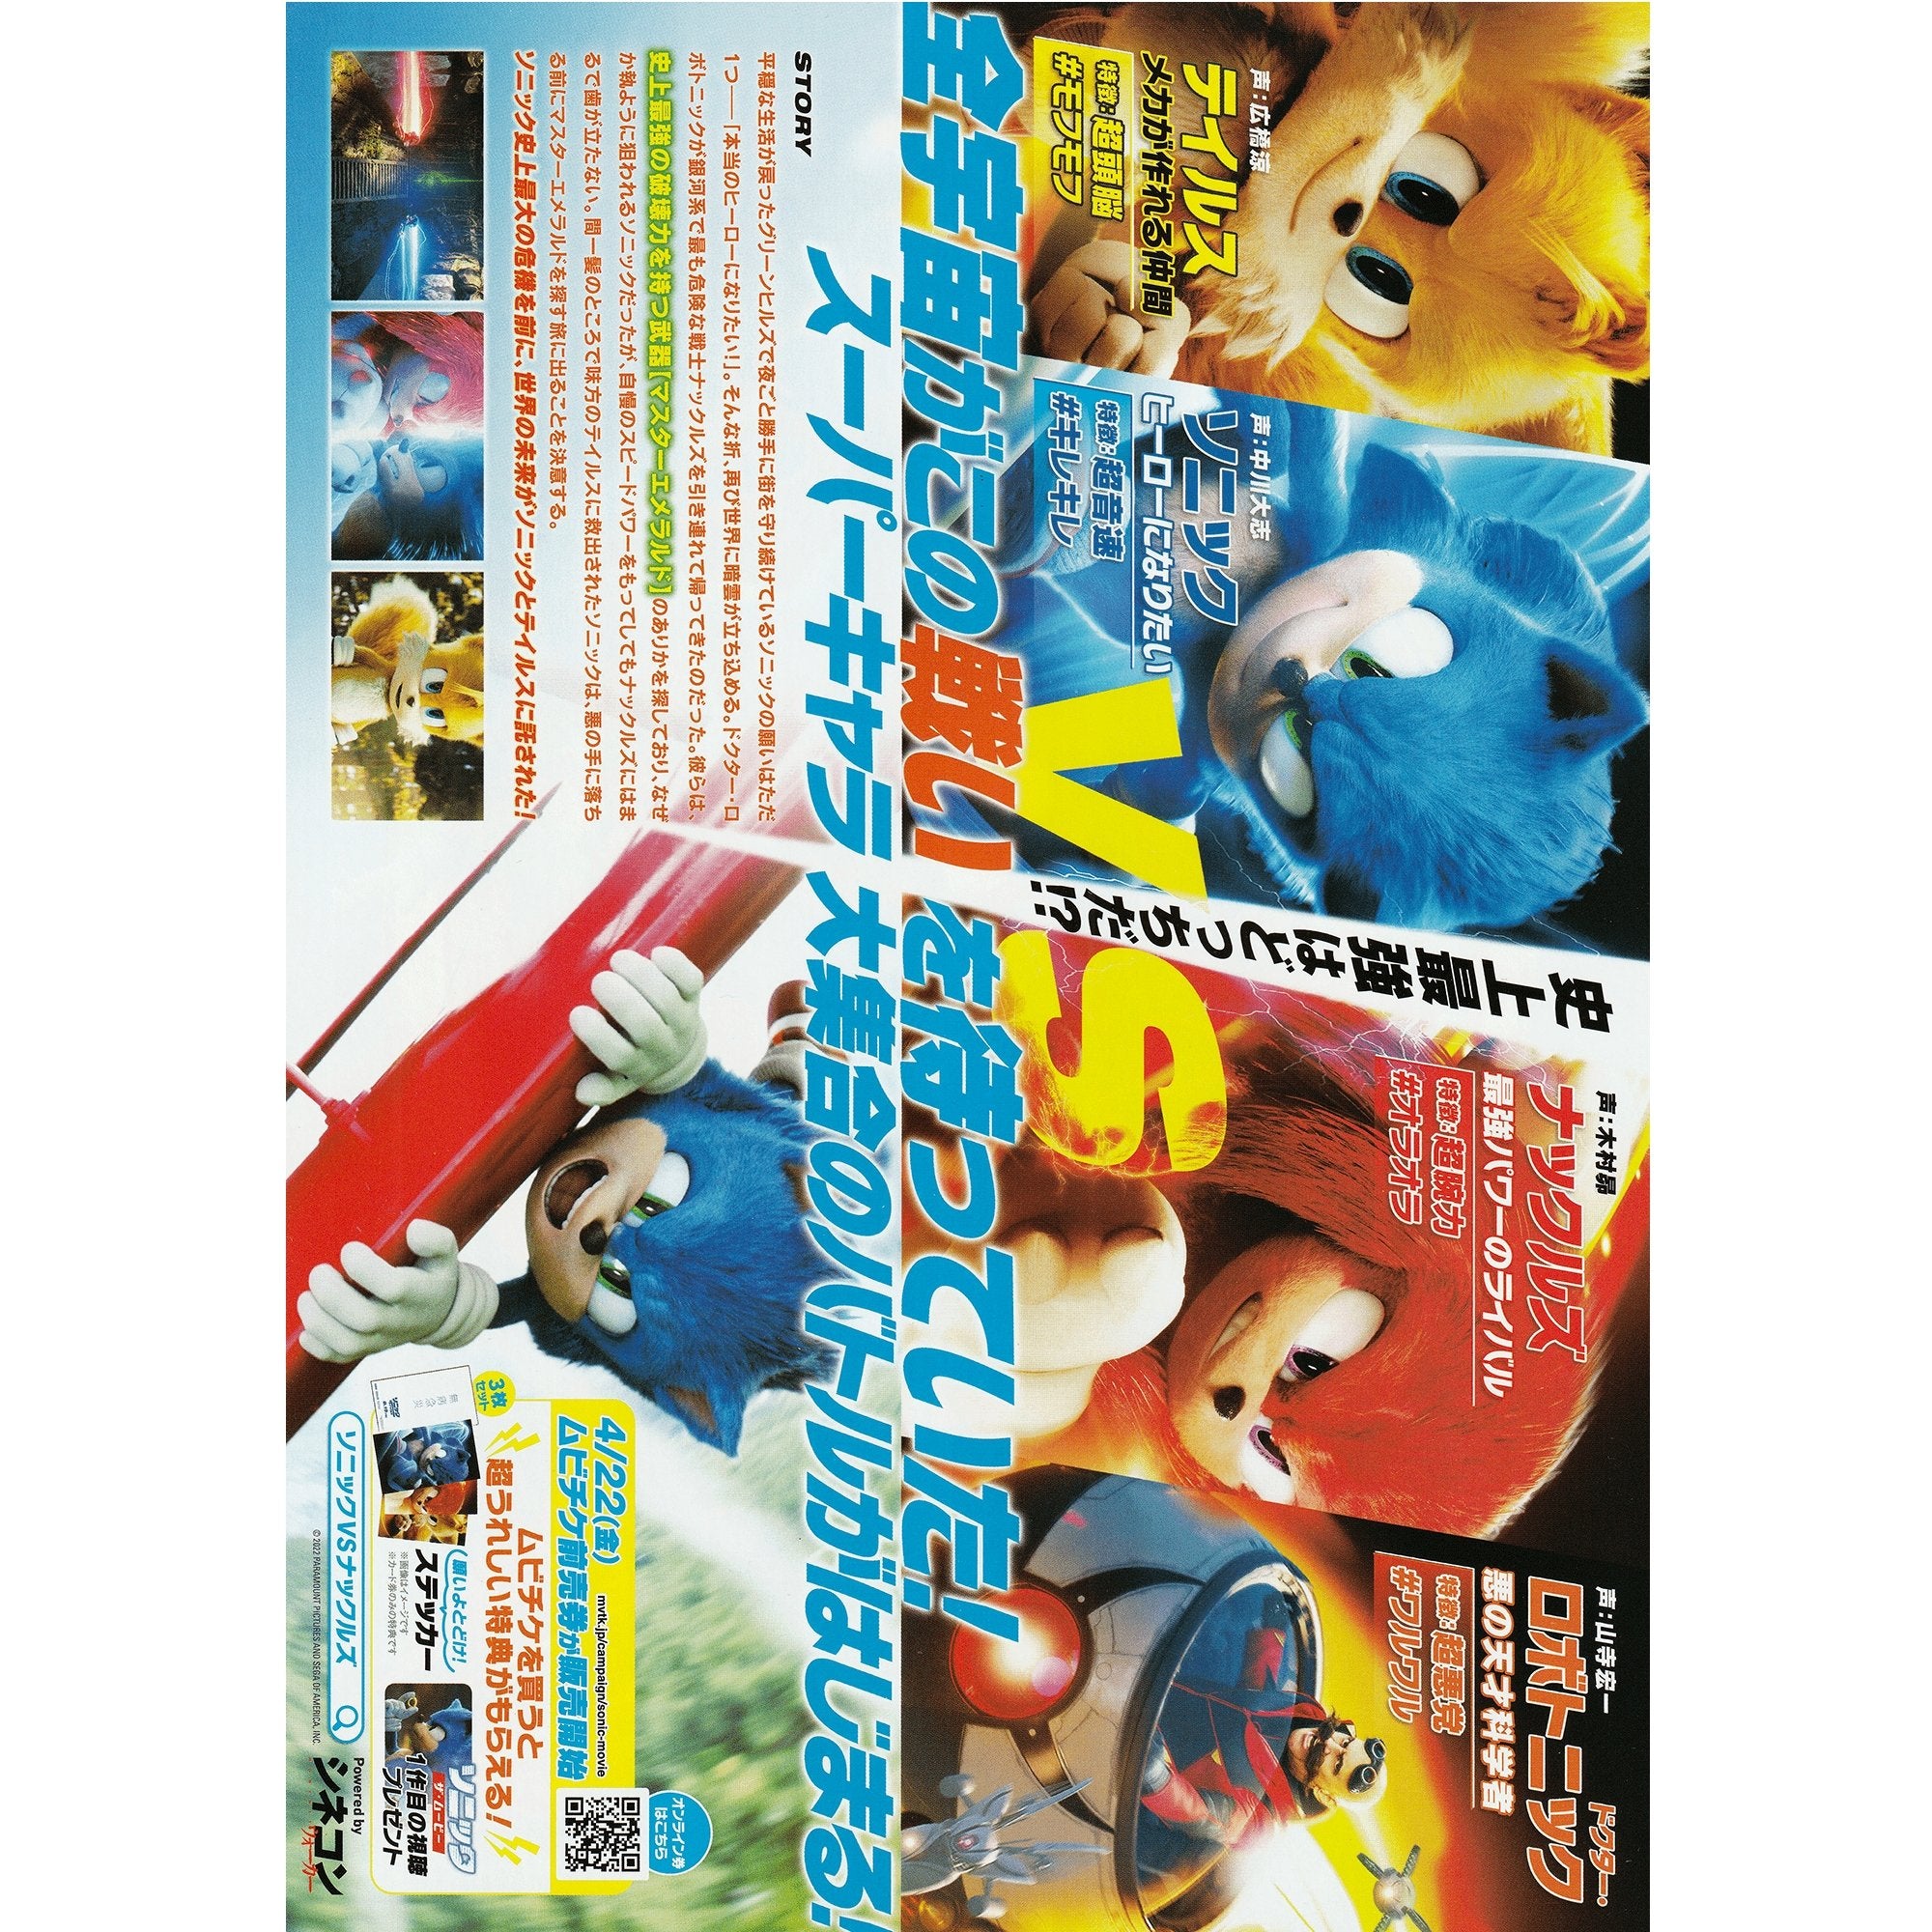 Japanese Sonic Movie Poster